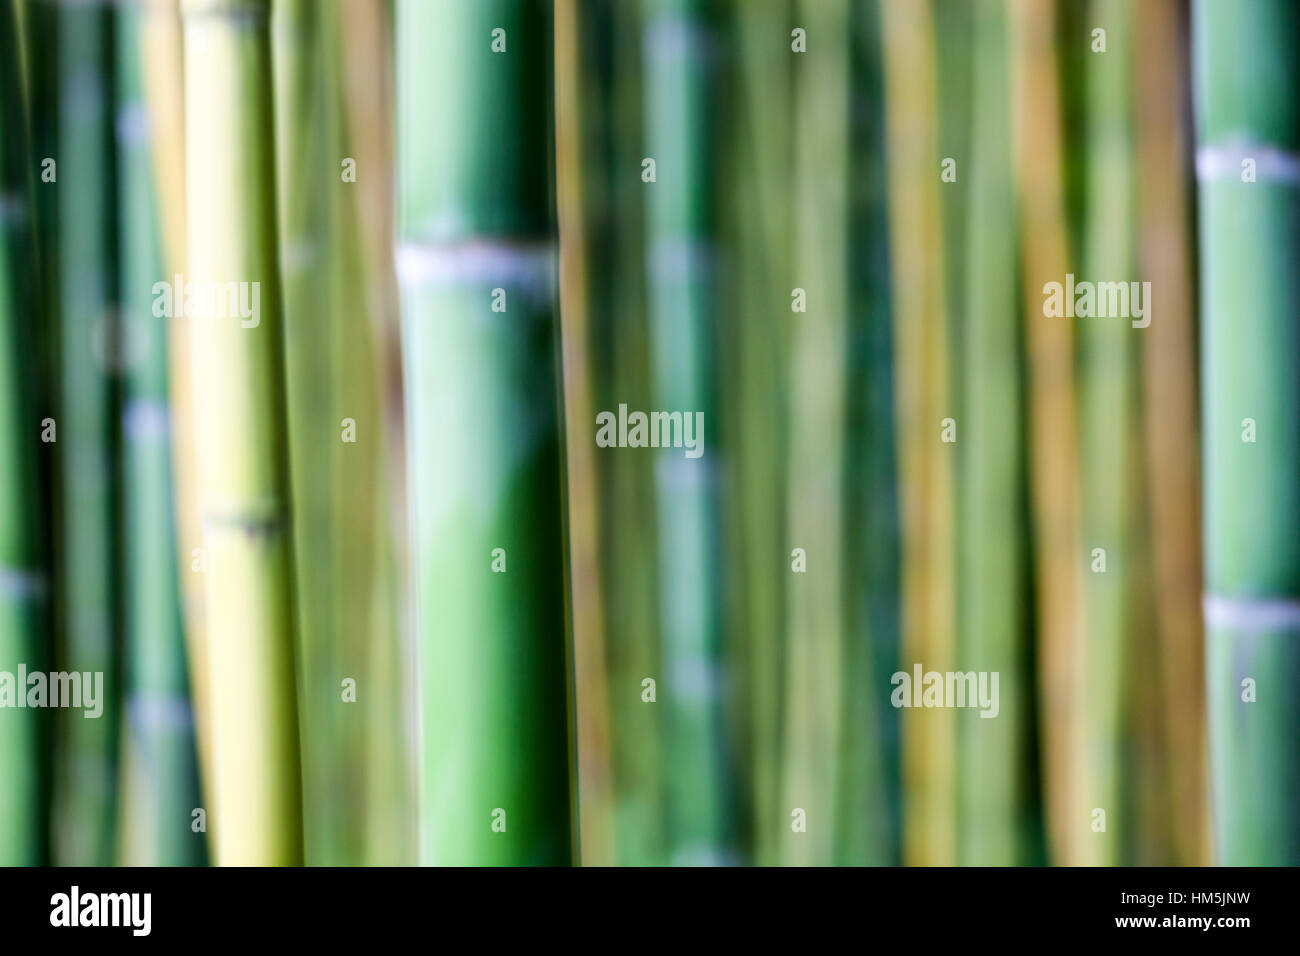 Abstract image of bamboo culms Stock Photo